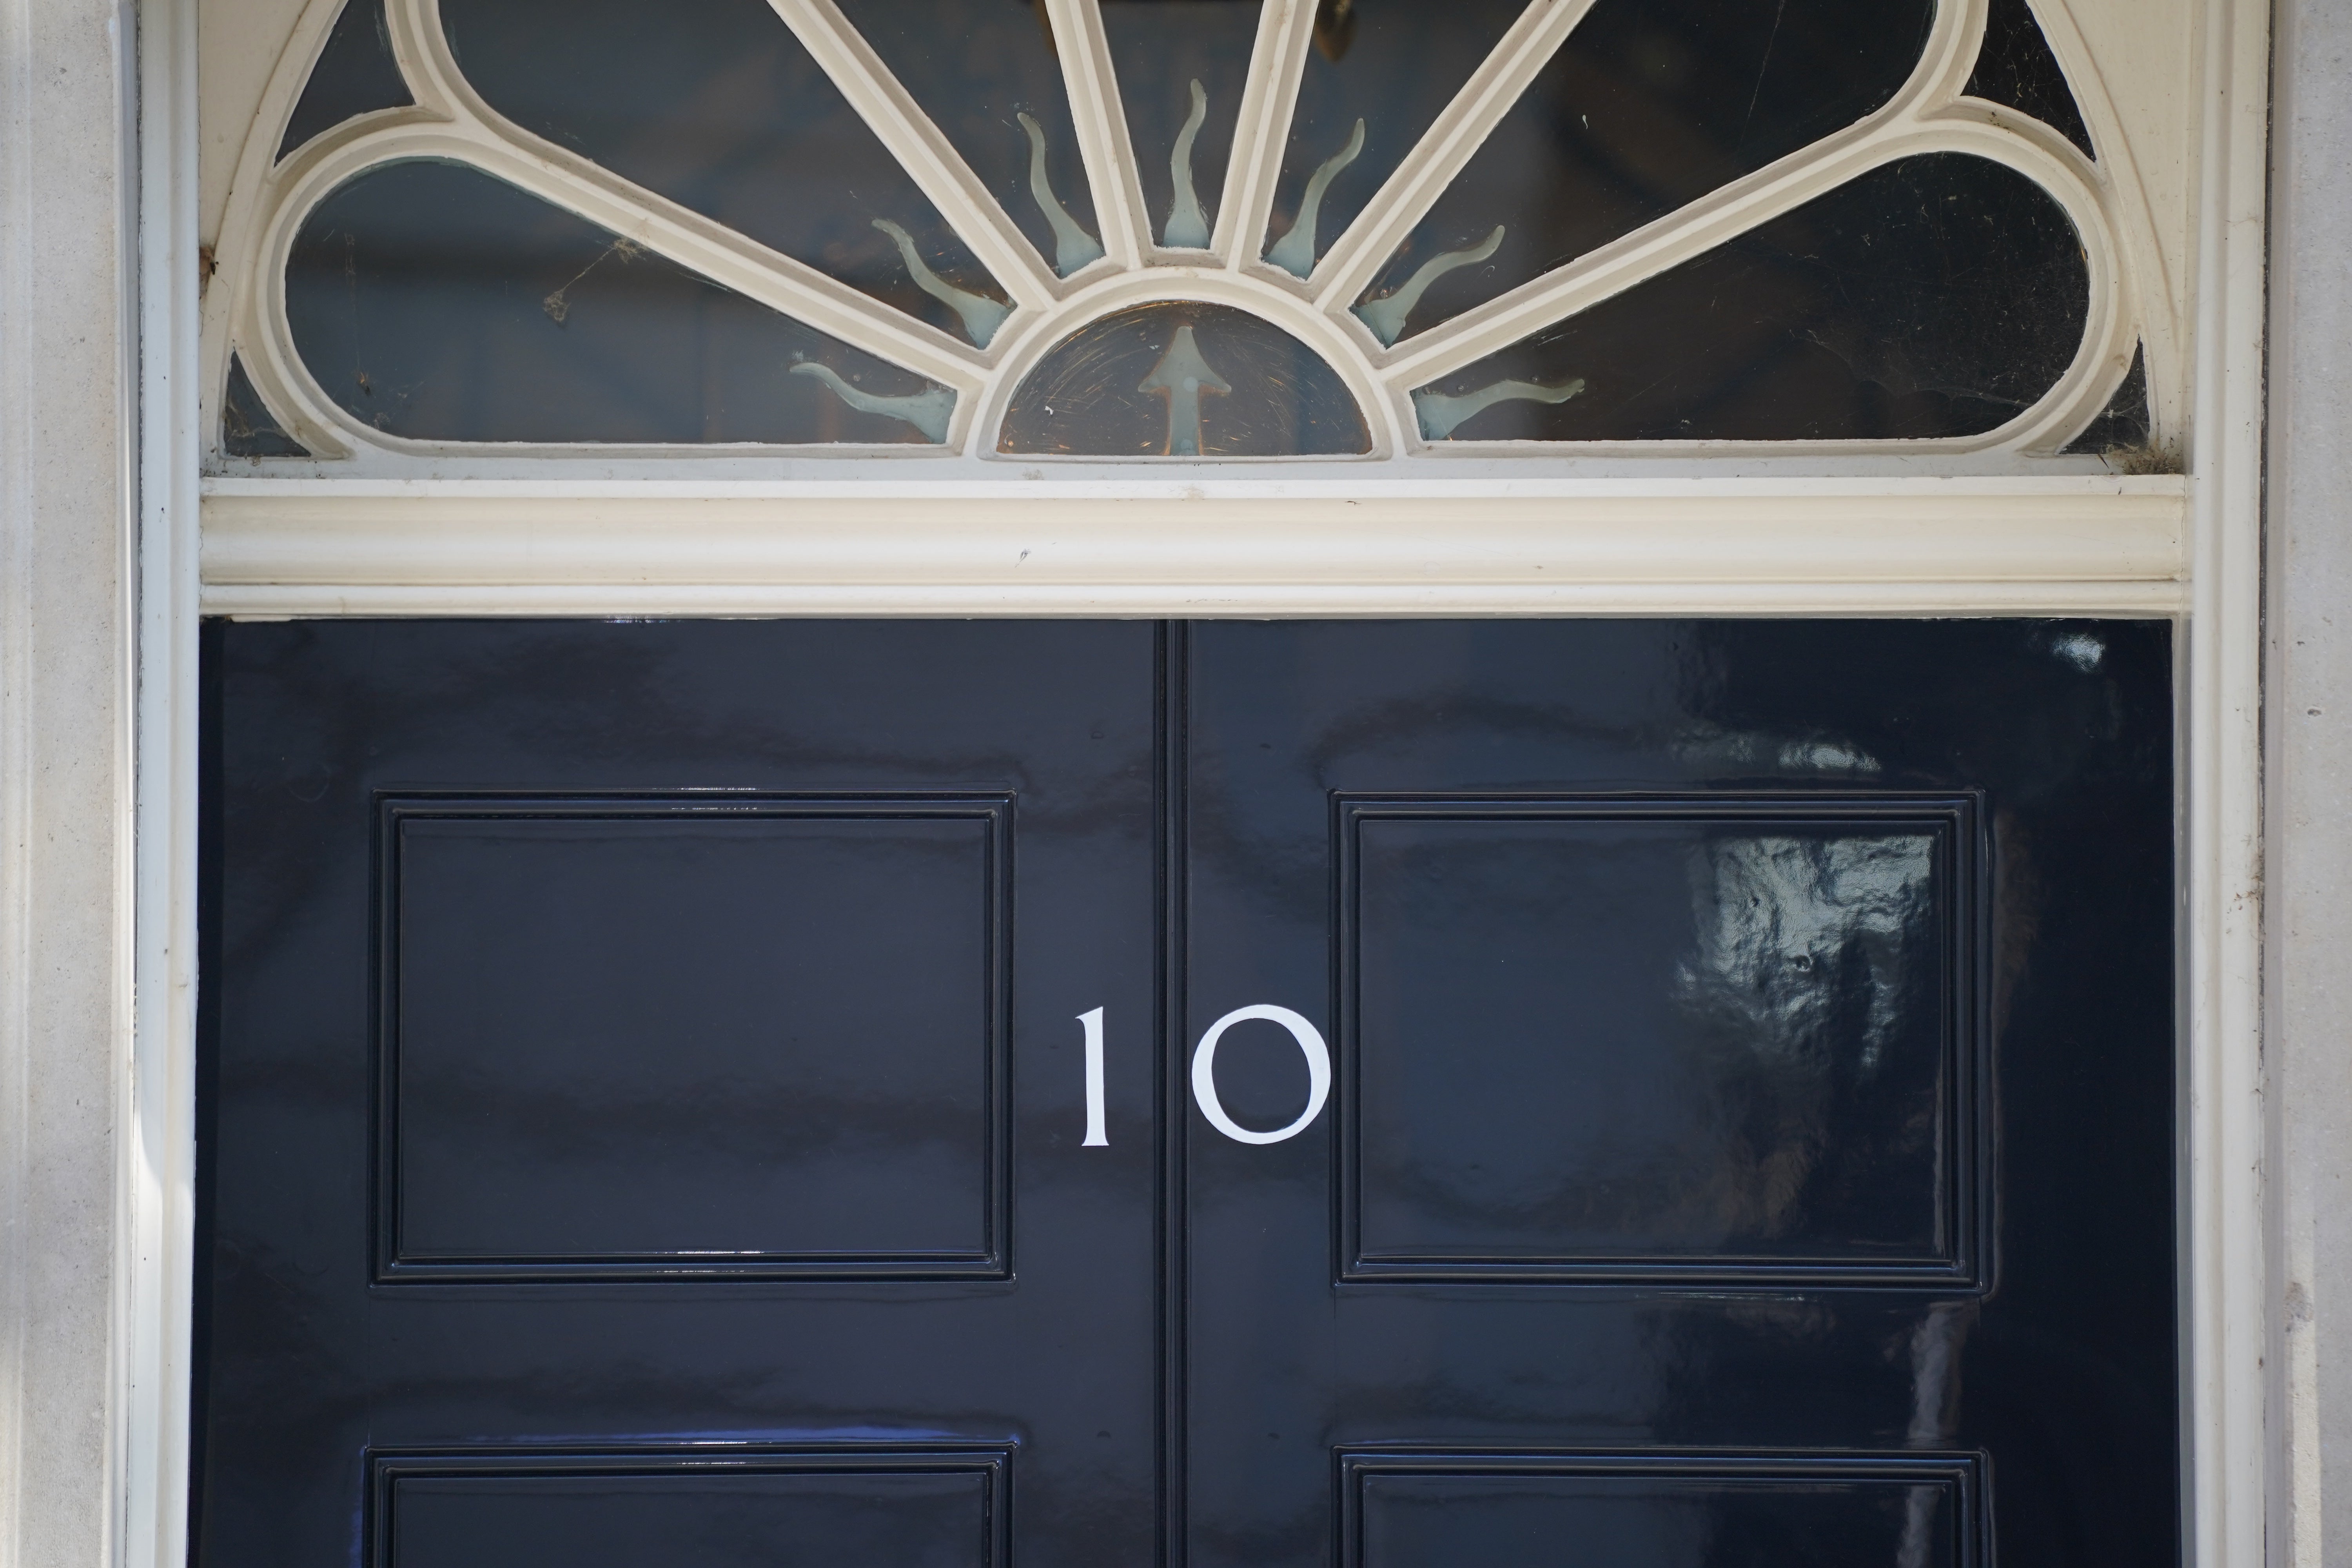 The controversial refurbishment of Boris Johnson’s official Downing Street flat has been a source of mockery and criticism for the Prime Minister (Dominic Lipinski/PA)